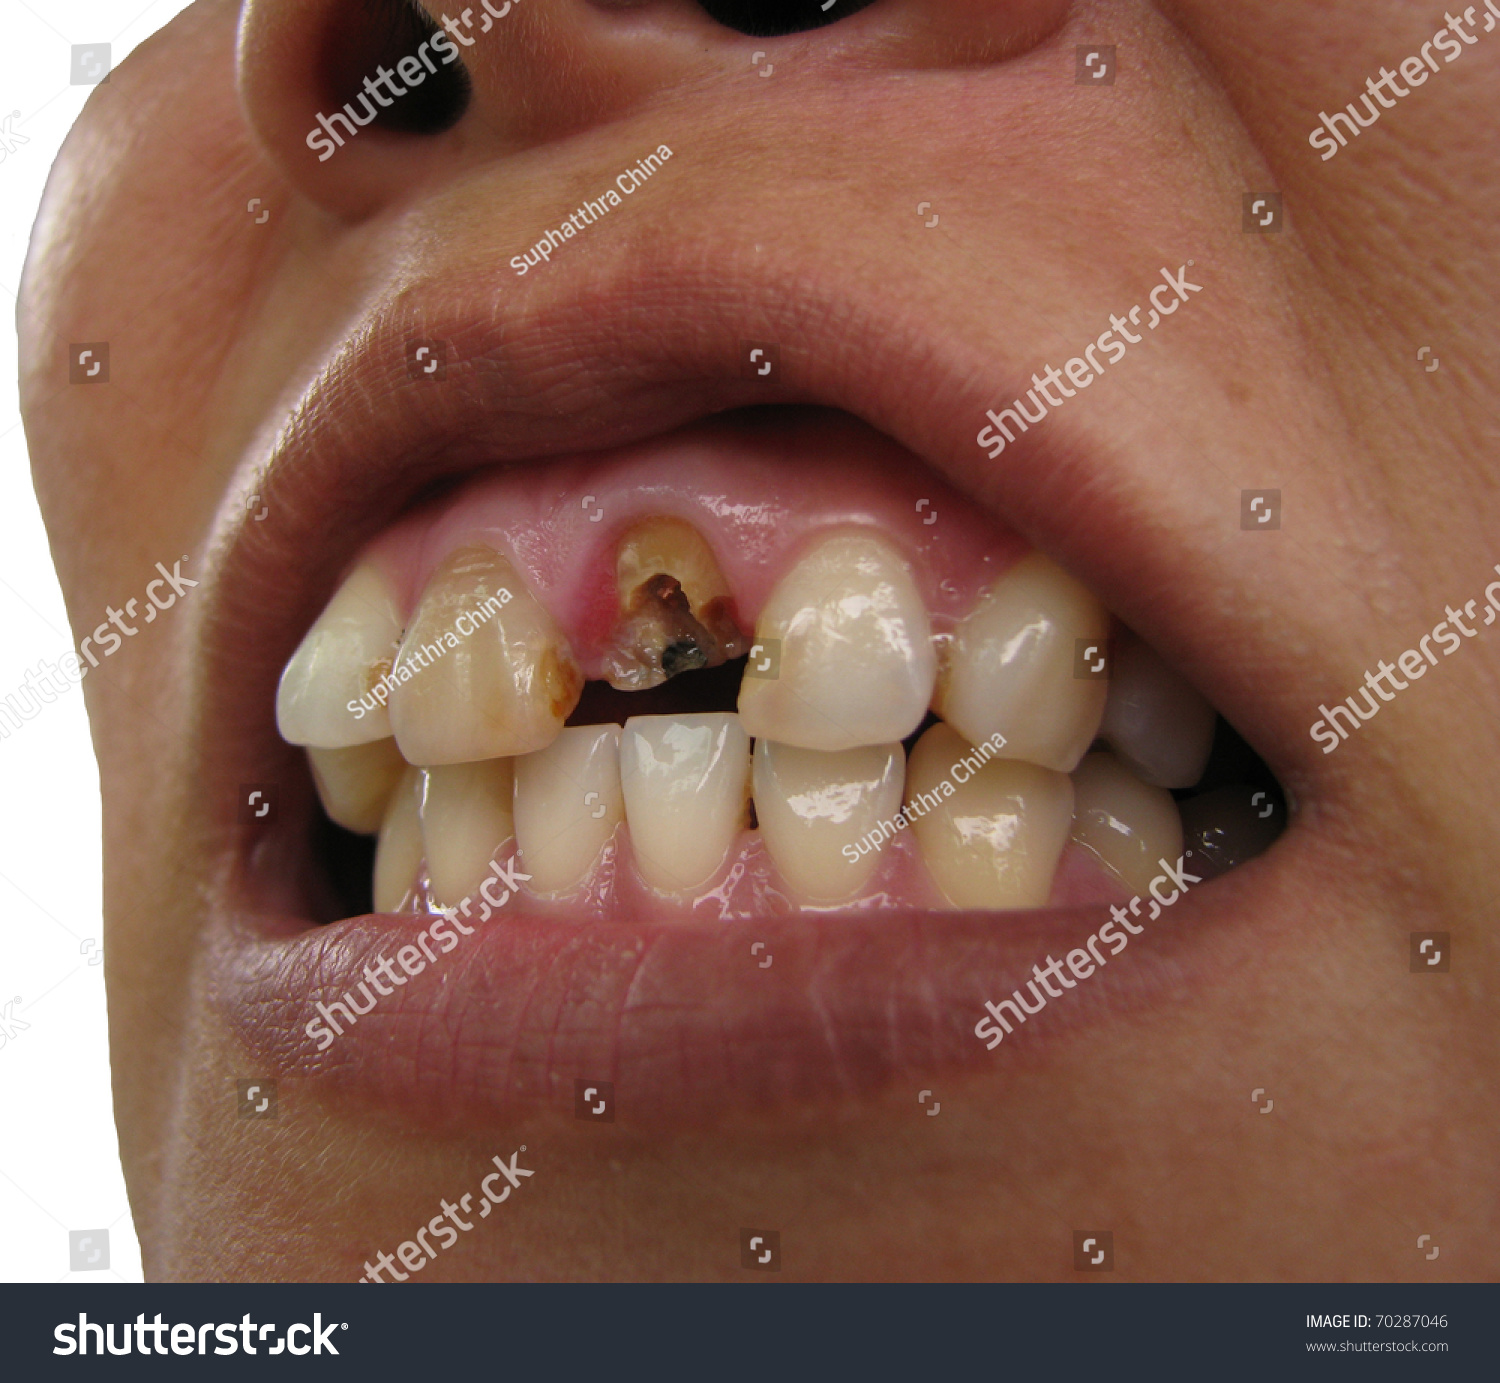 Broken tooth upper right central incisor frontal view #70287046